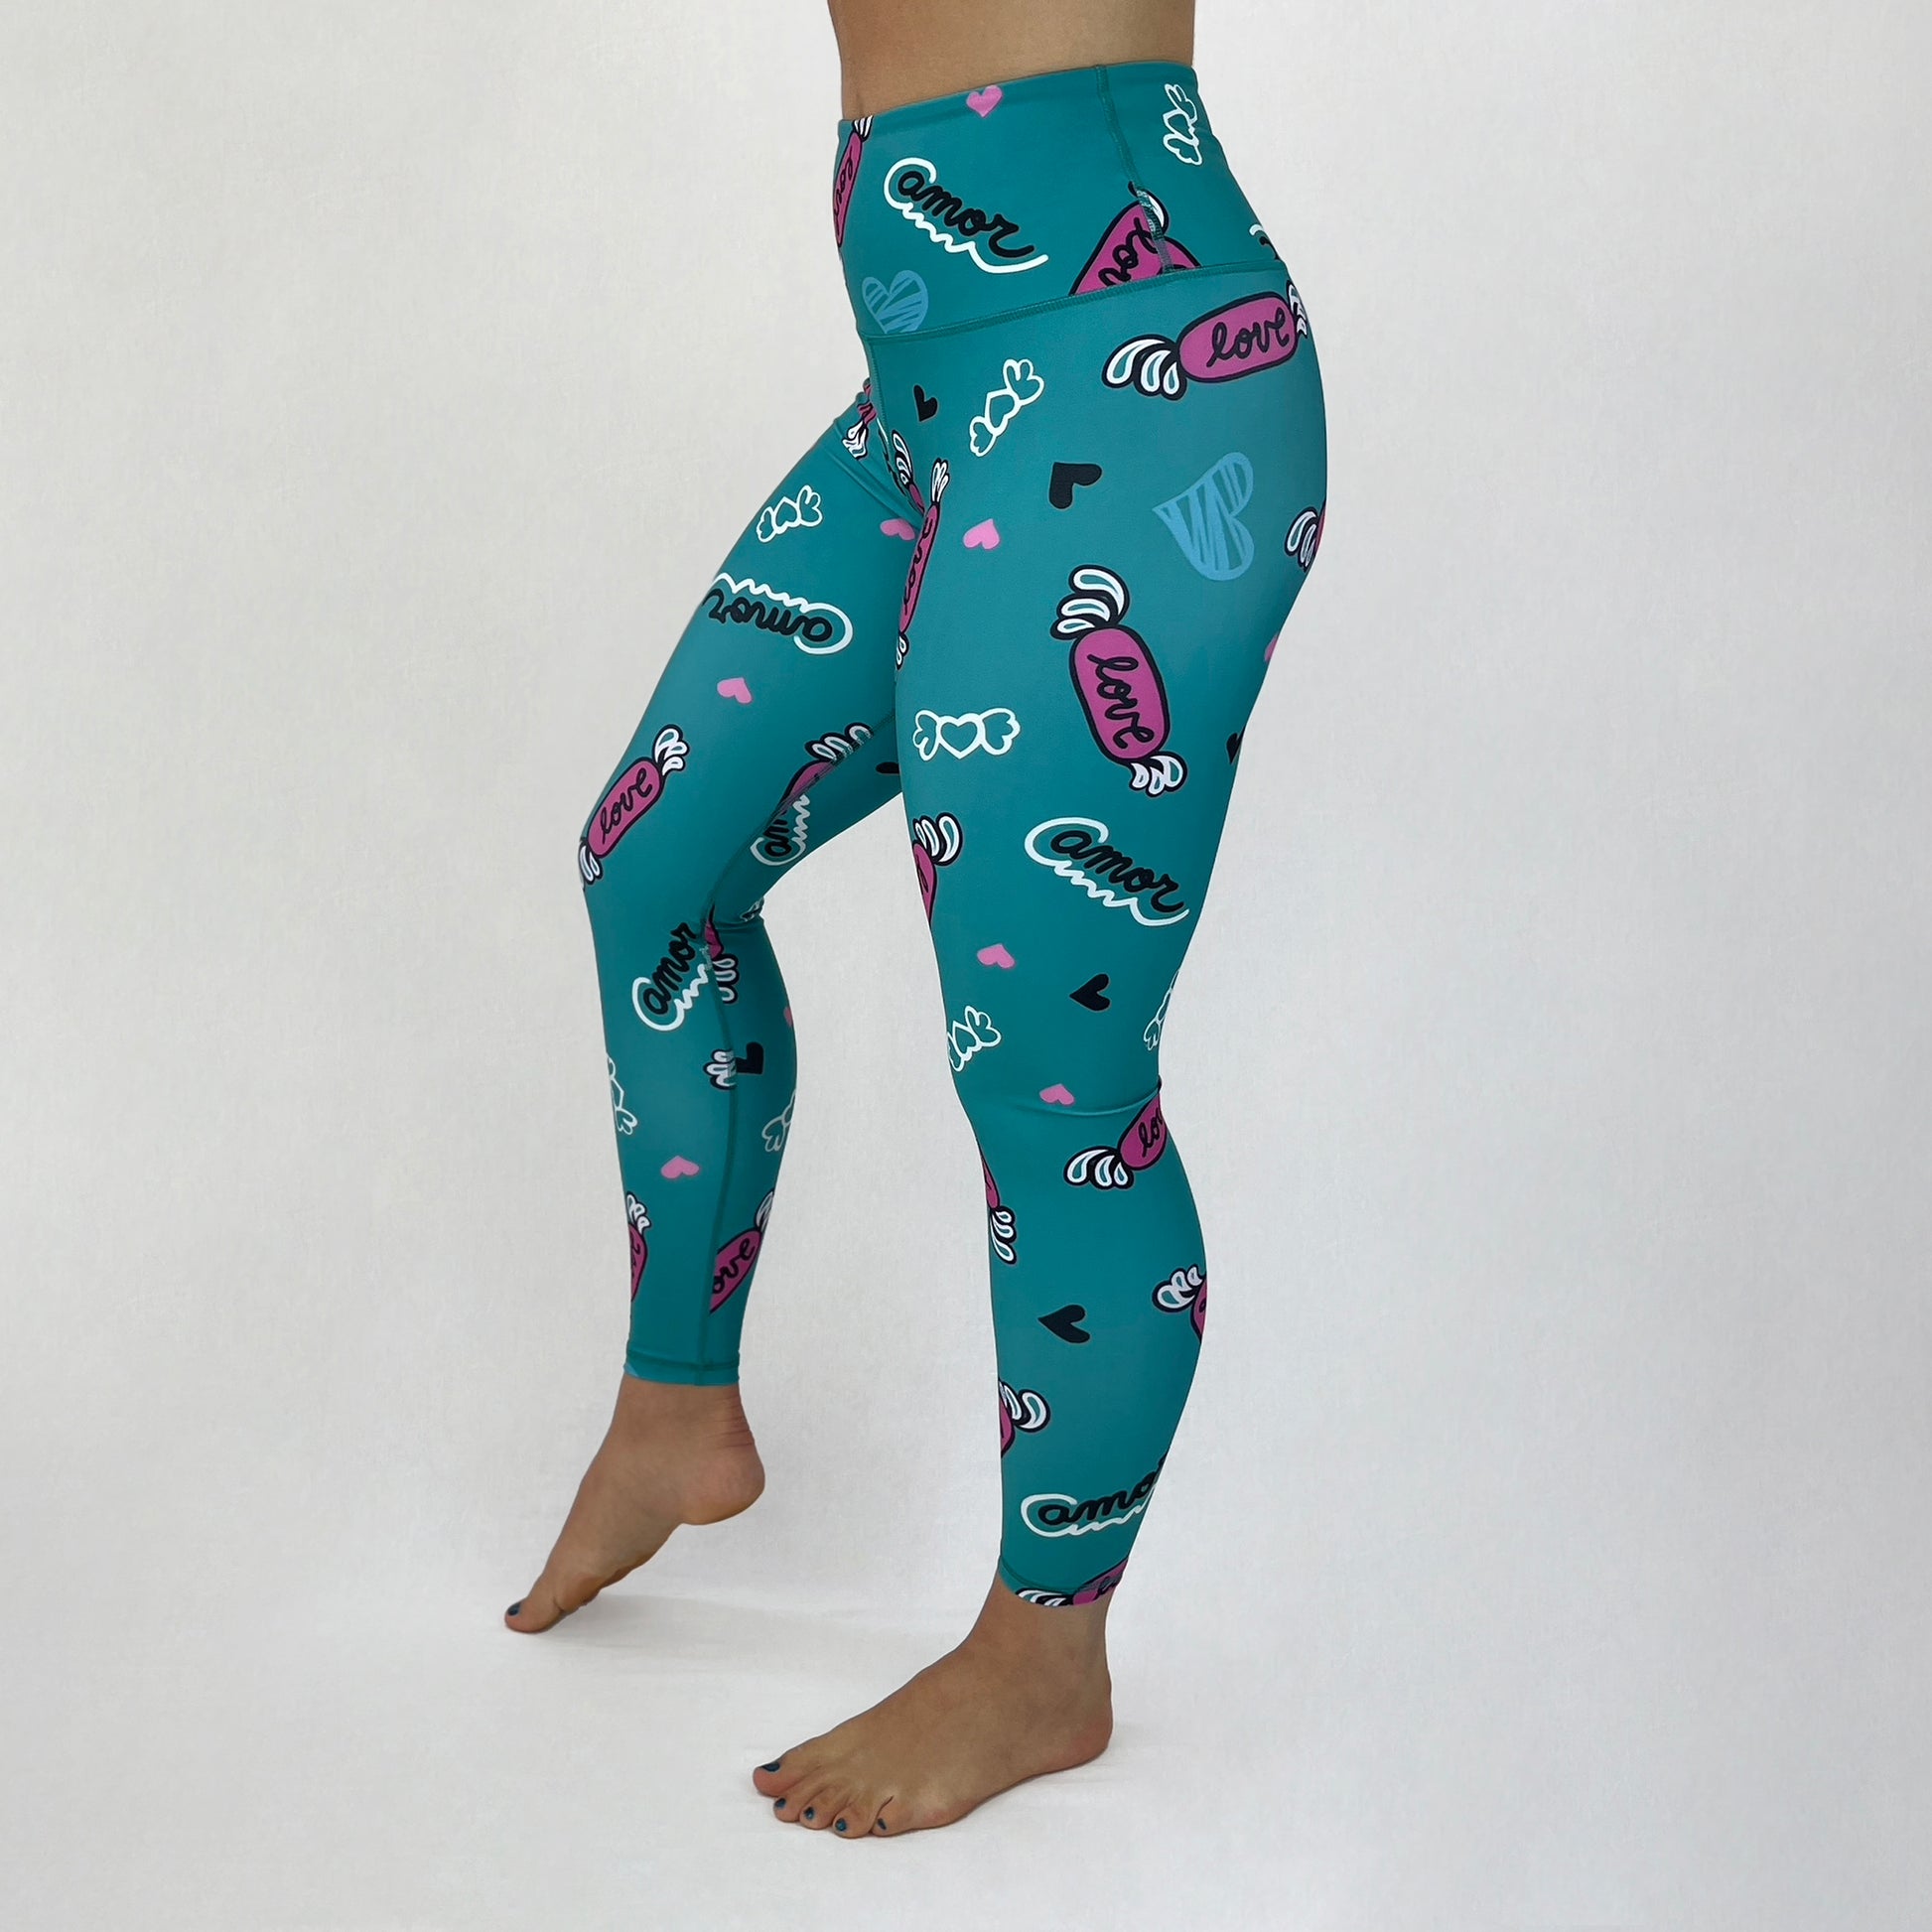 Ethical High Waisted full length Leggings Oda in Love by Monique Baqués side